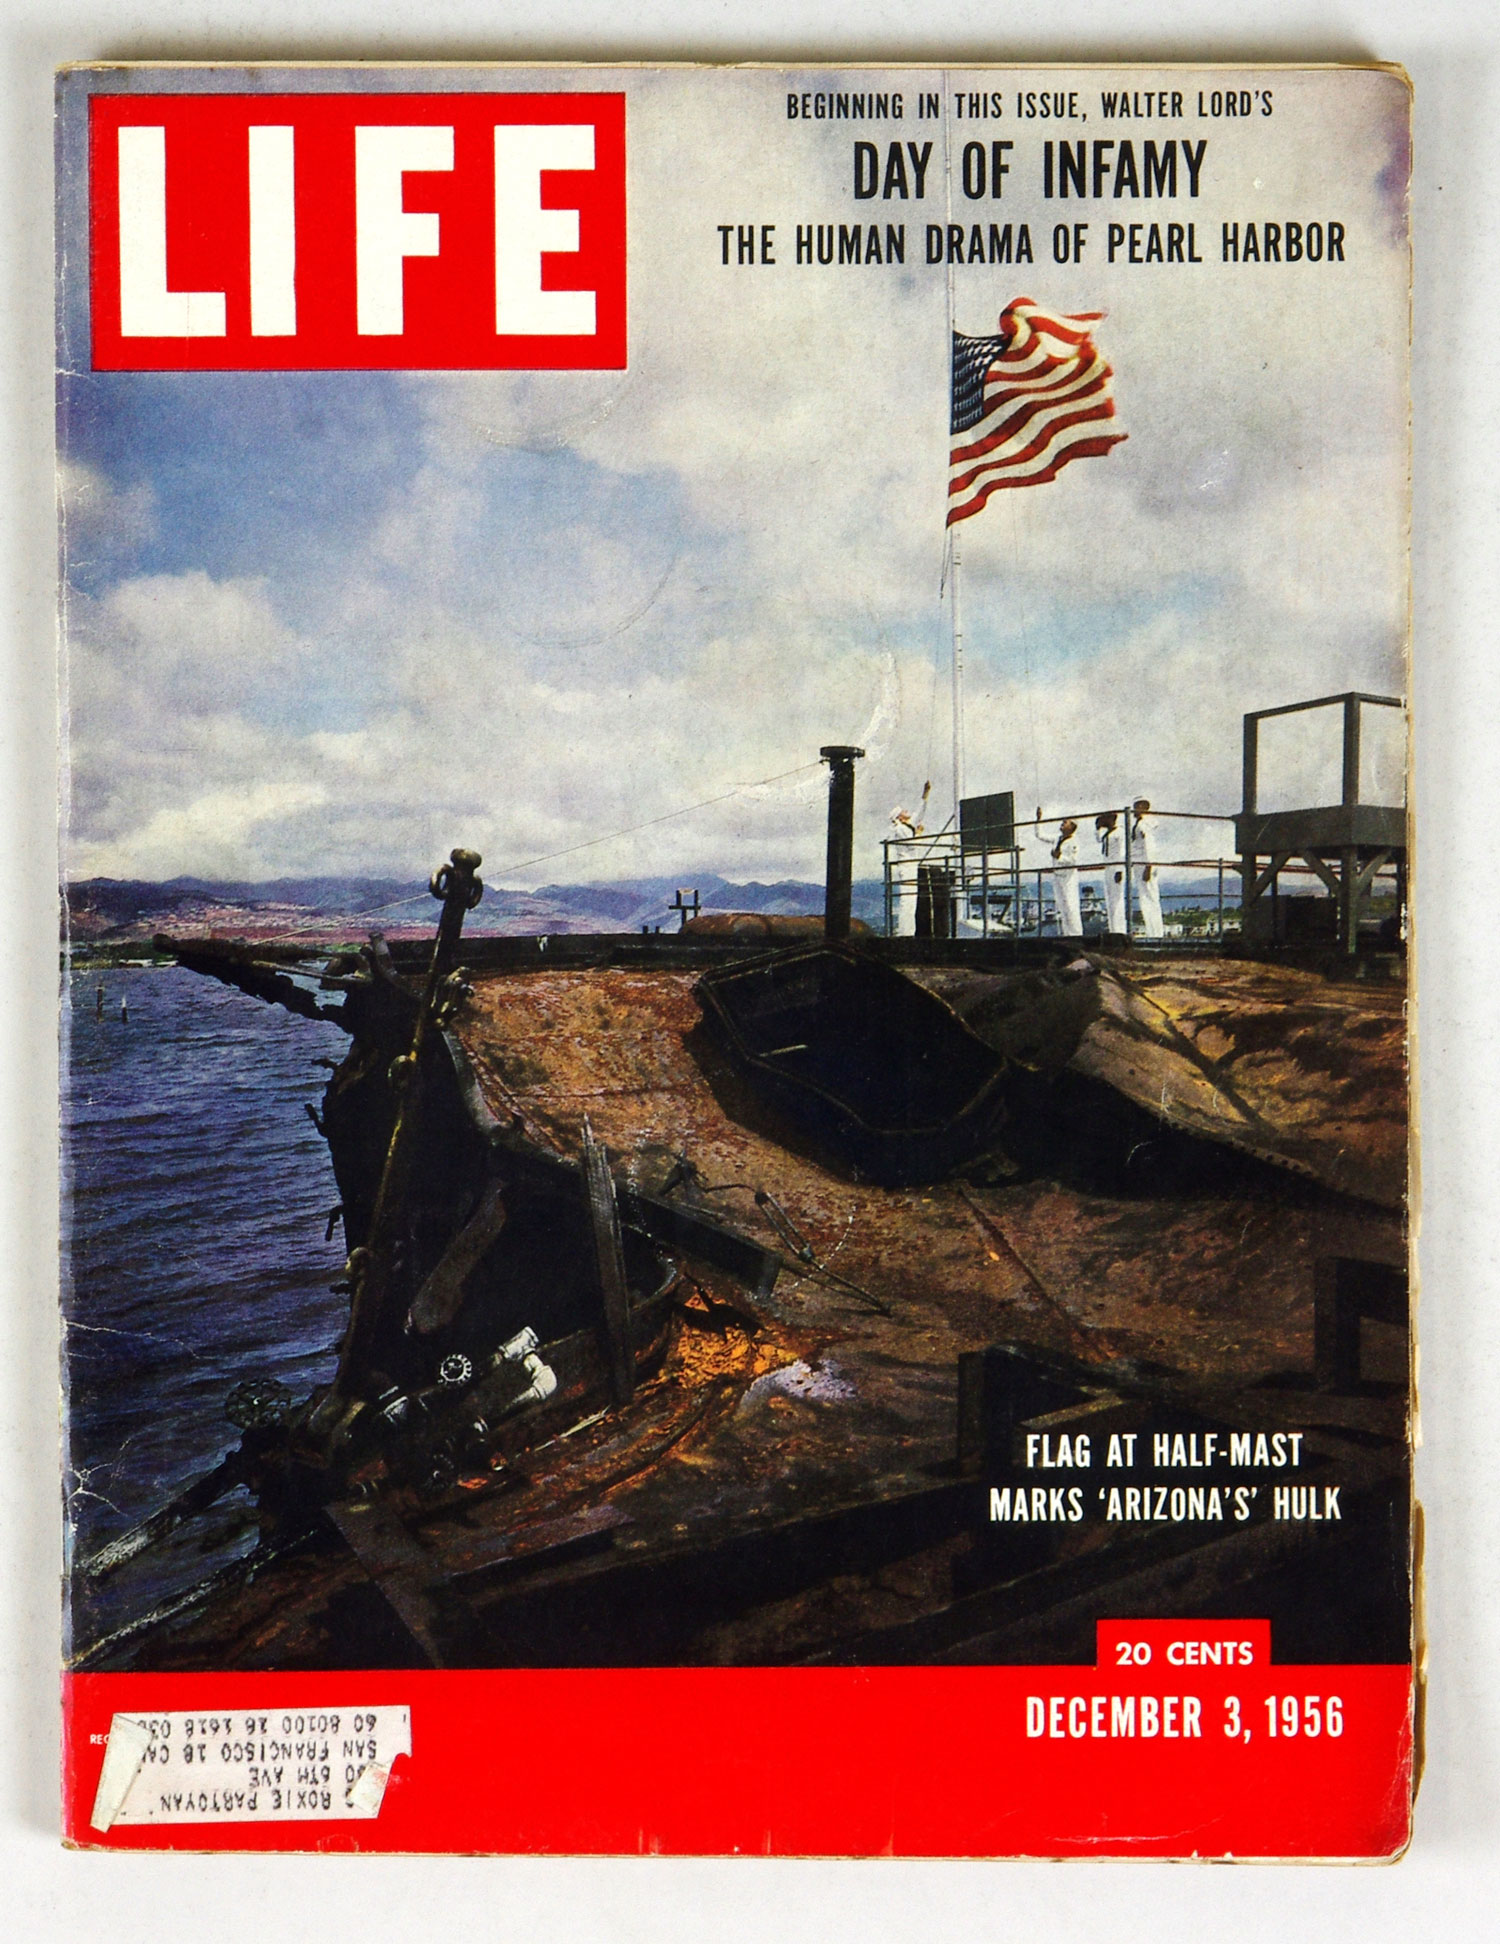 LIFE Magazine Back Issue 1956 December 3 Day of Infamy The Human Drama of Pearl Harbor